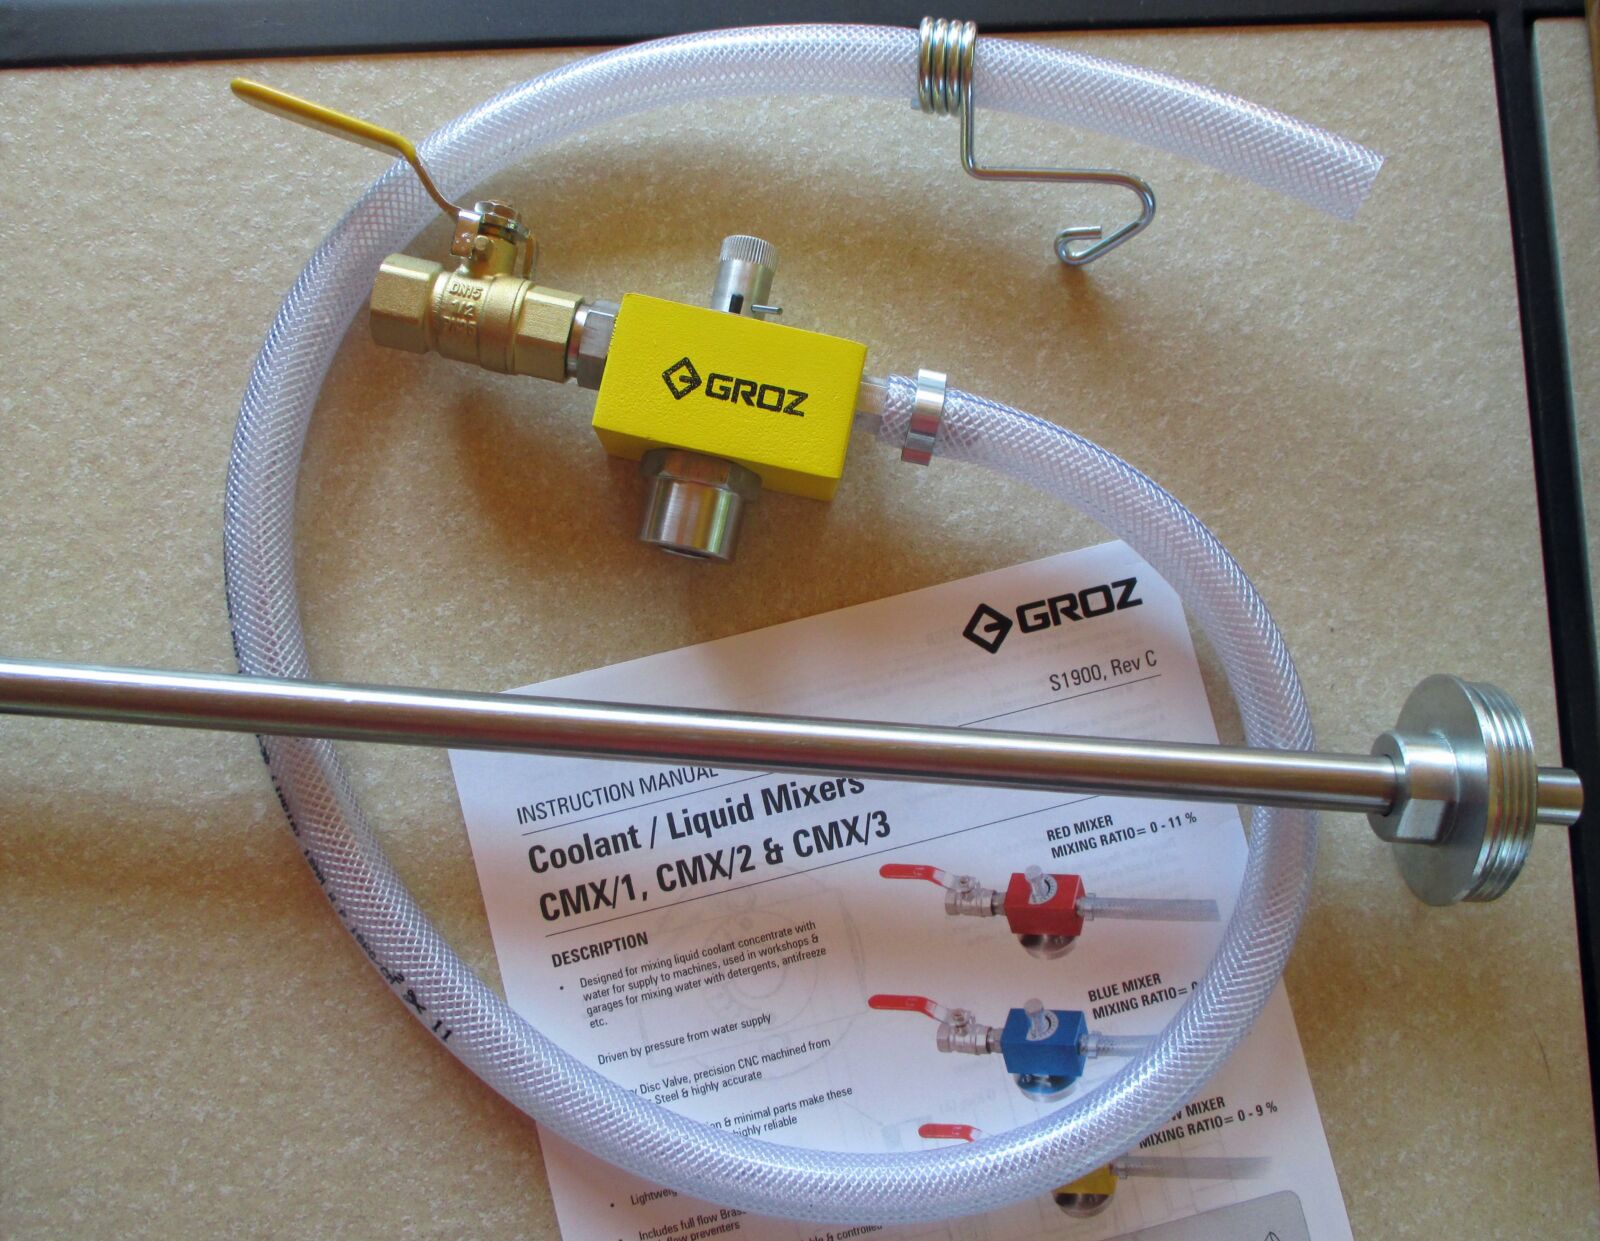 Groz Plus Deluxe Venturi Mixers for Metalworking Fluids (Coolants, Cutting  Fluids) and Cleaners - Coolant Consultants, Inc.